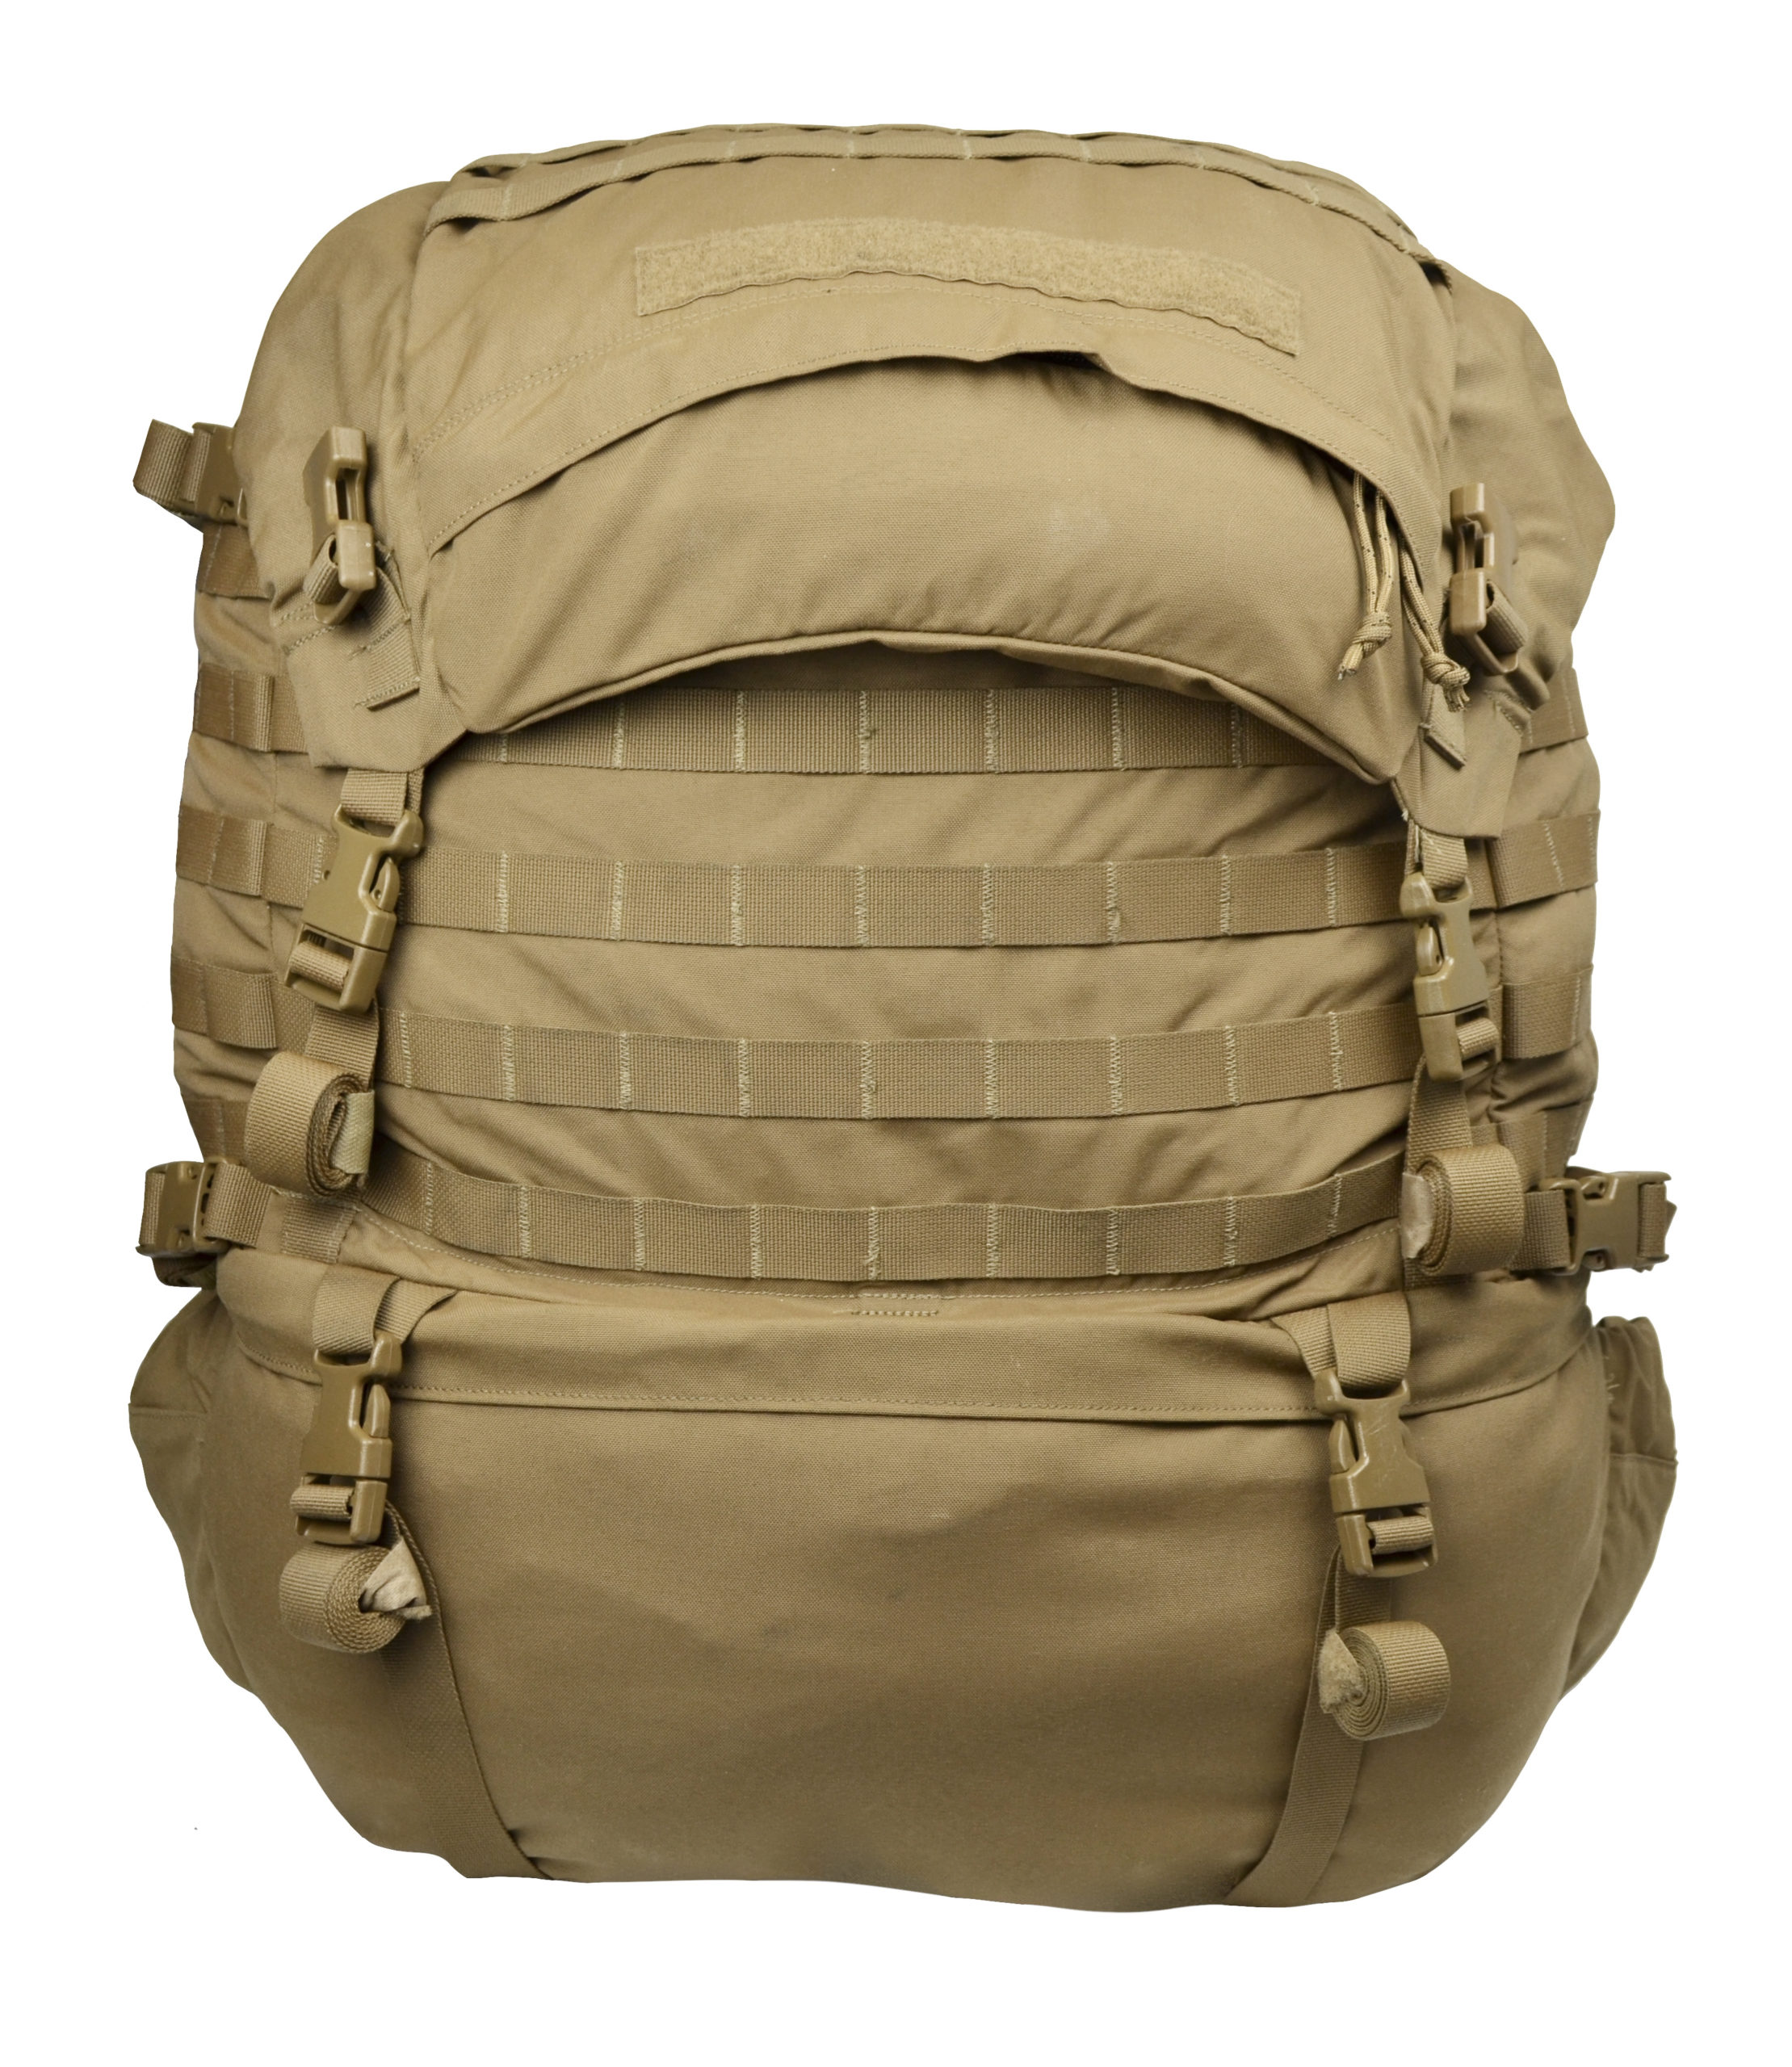 Details about   AUTHENTIC USMC FILBE Main Field Pack ** Coyote Brown ** Marine Large Rucksack 